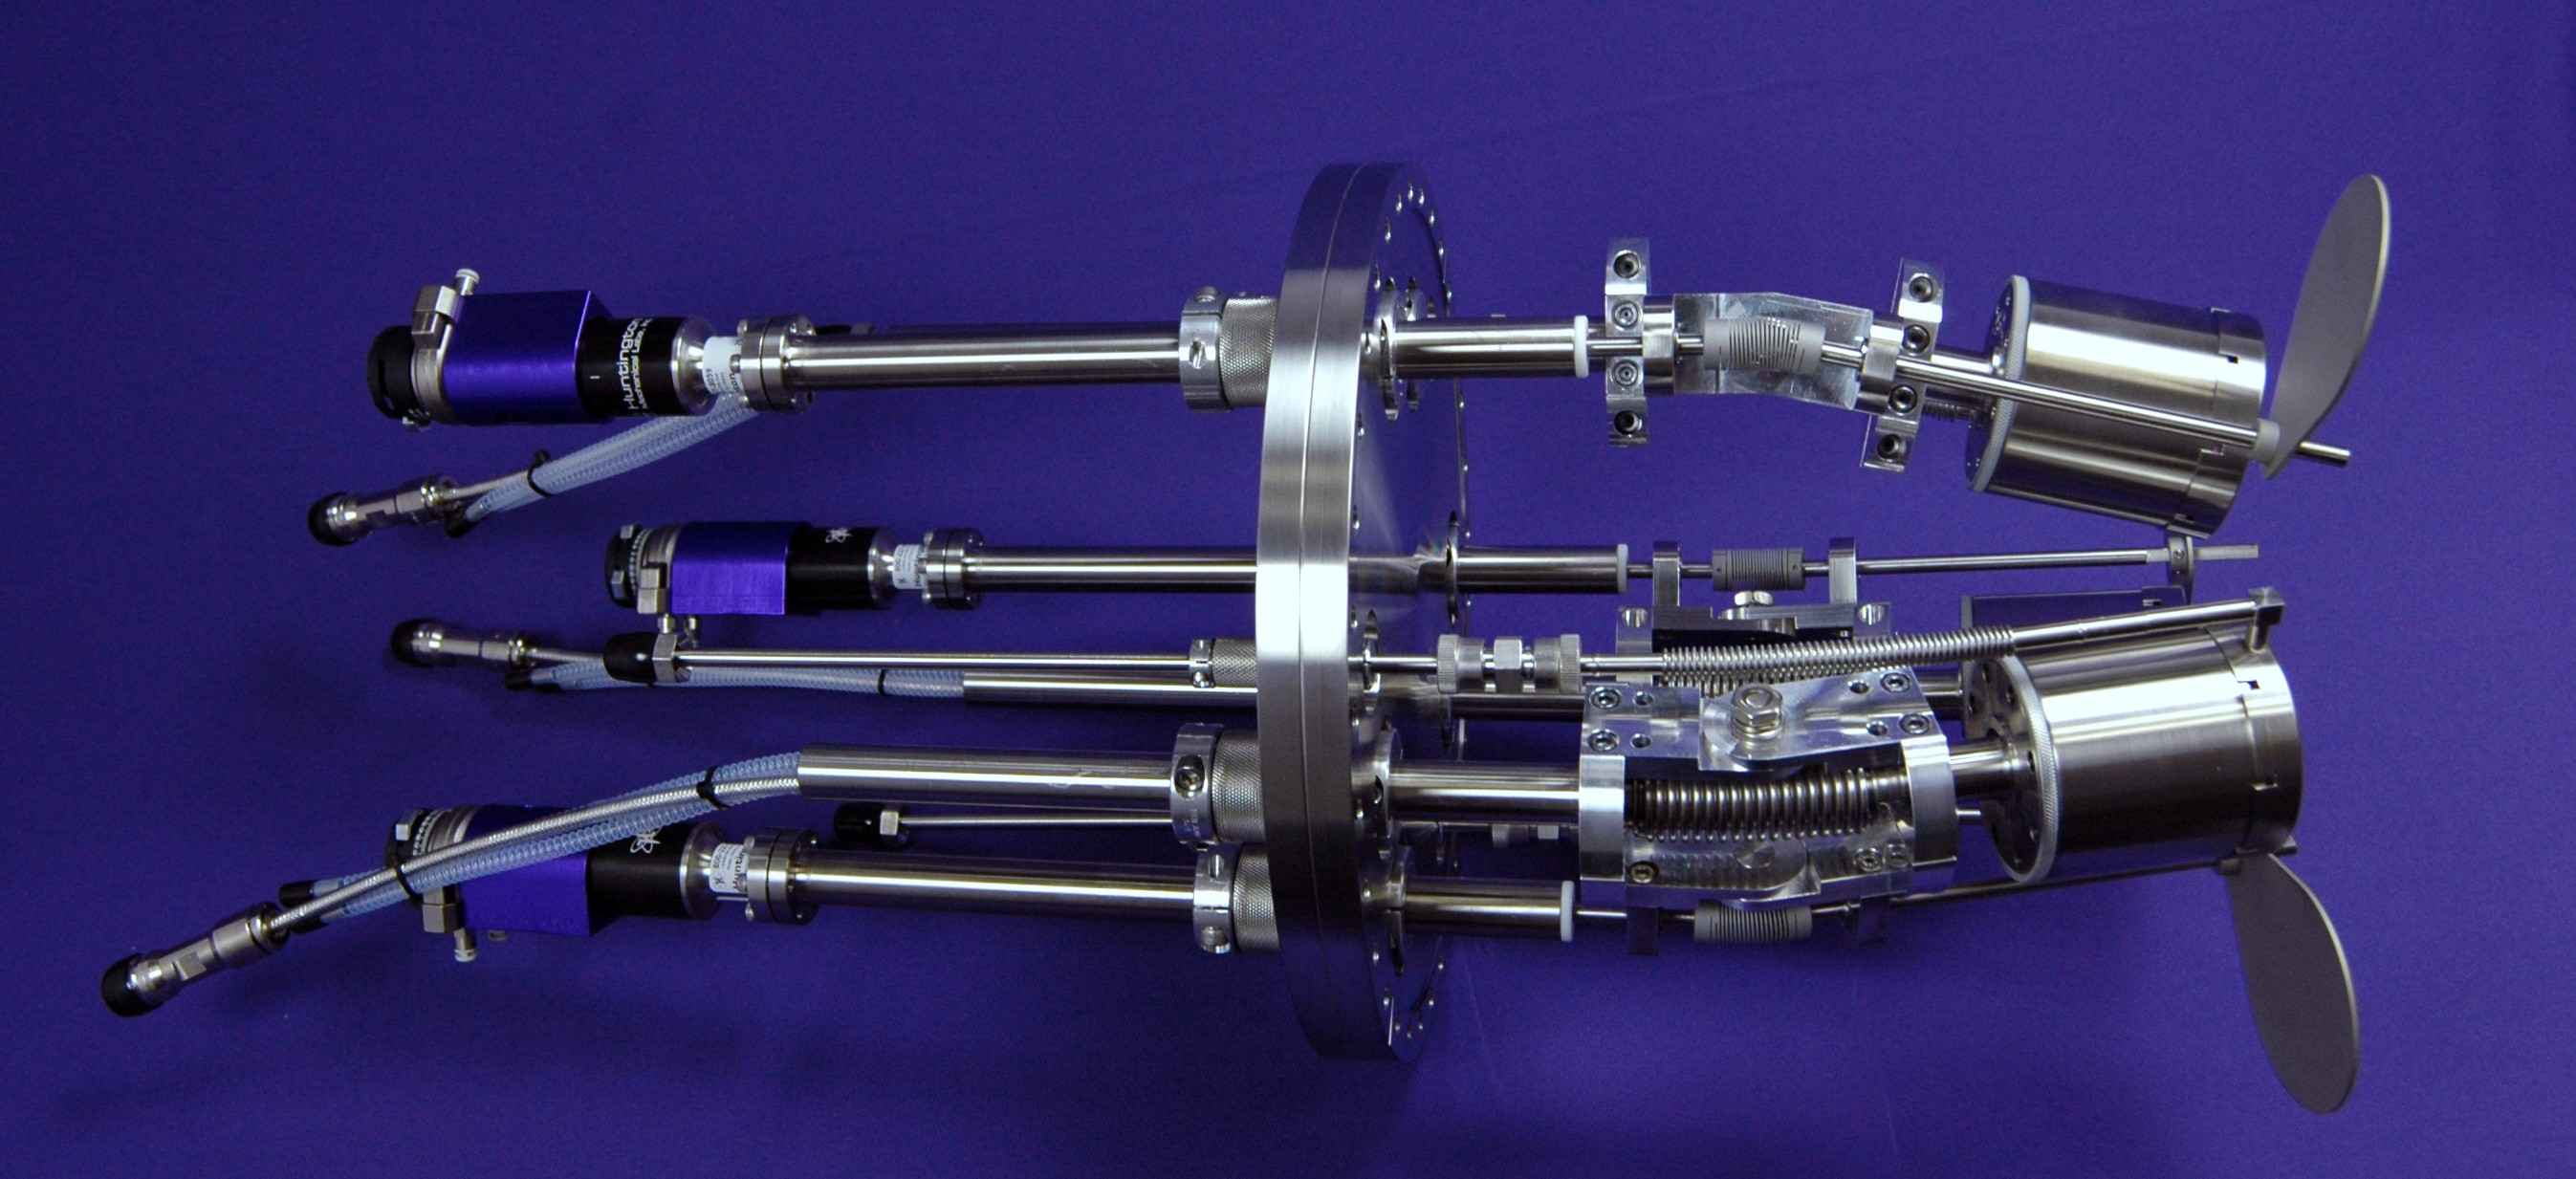 ONYX-2 Cluster with Gas Injection and Pneumatic Shutters